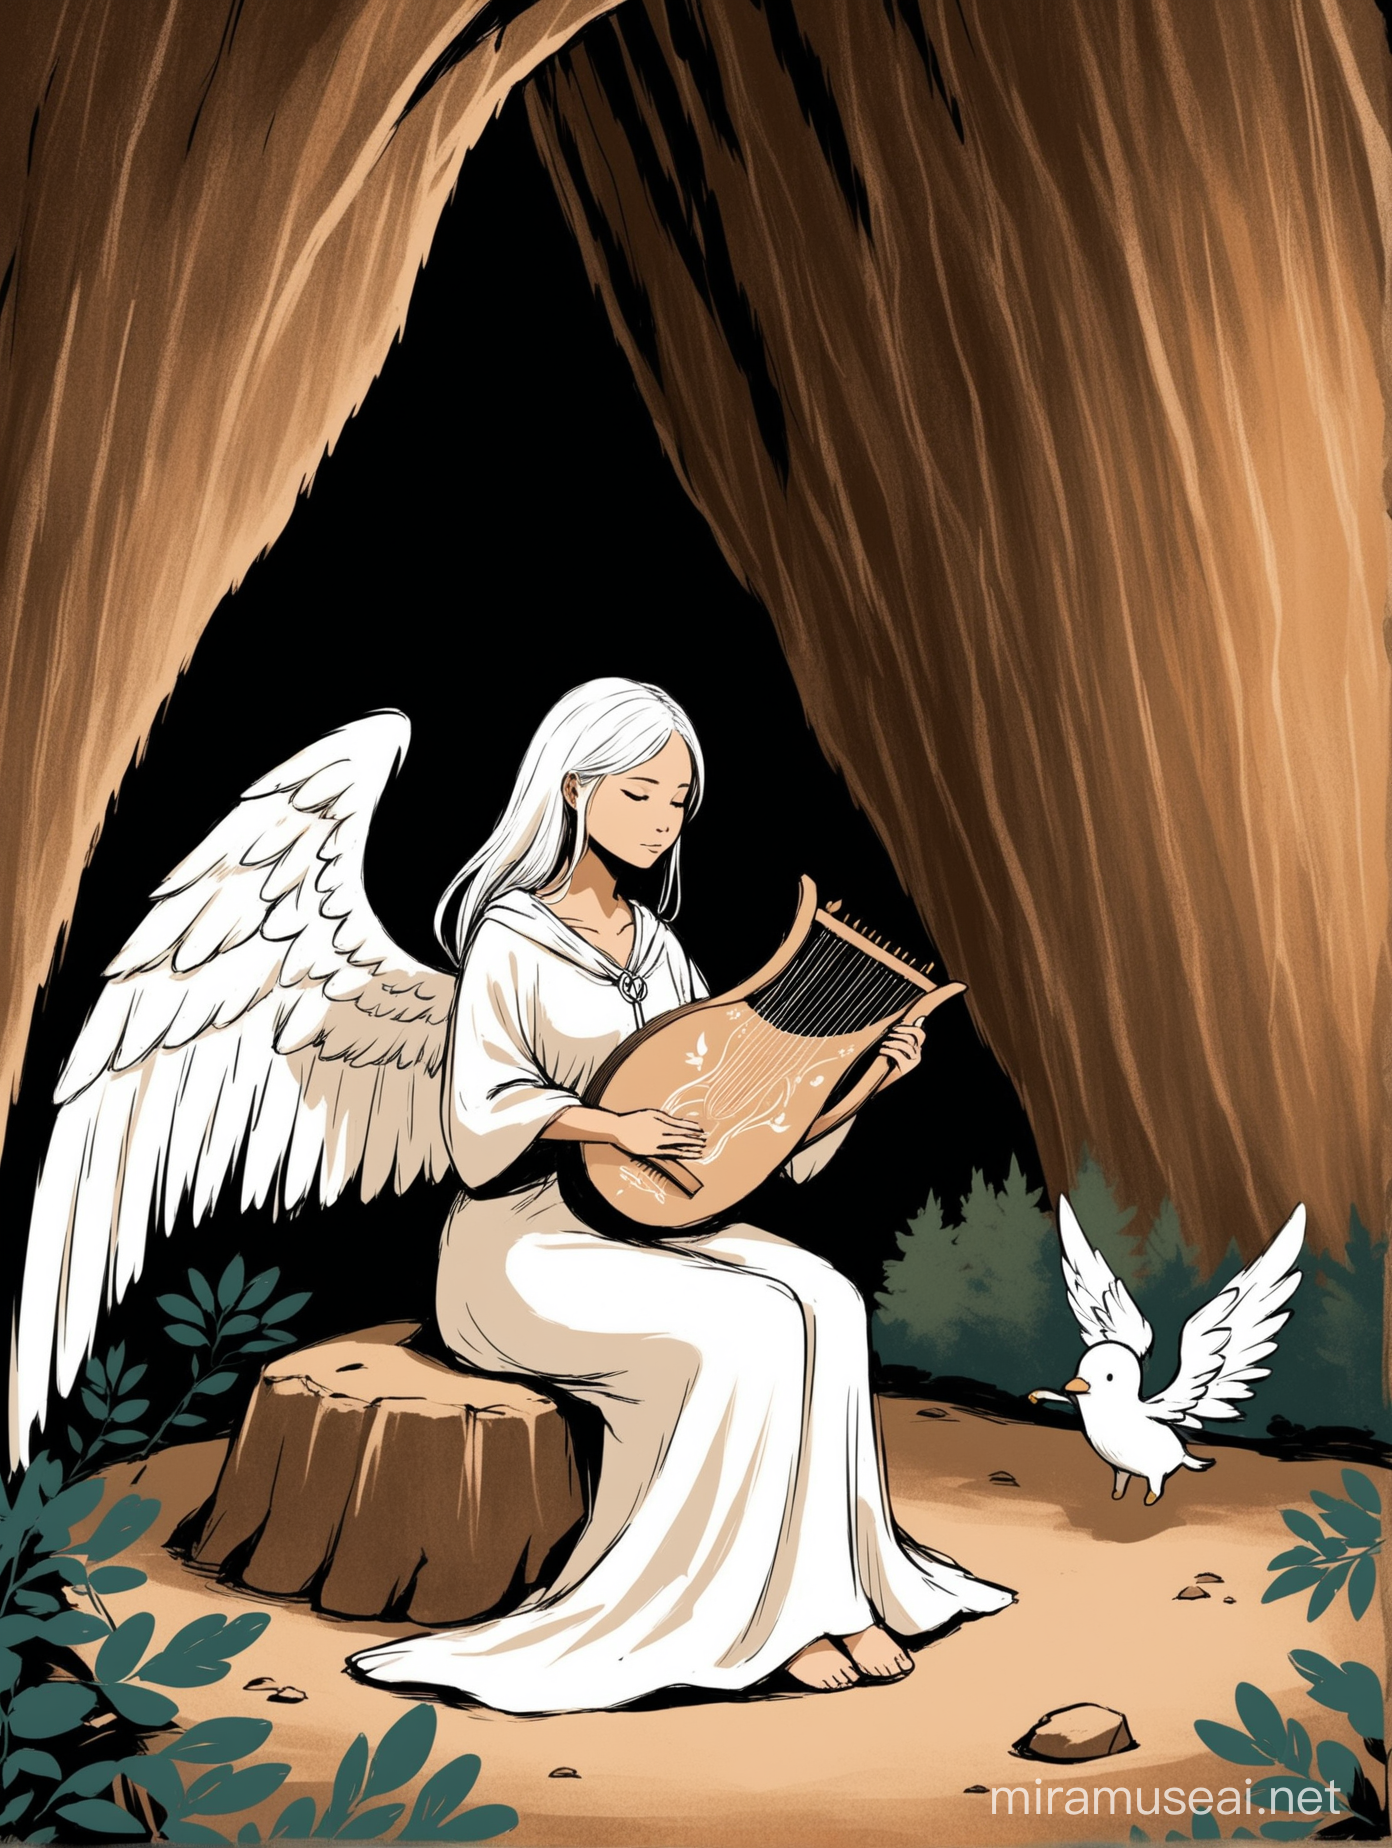 Majestic Angel Woman Playing Lyre in Forest